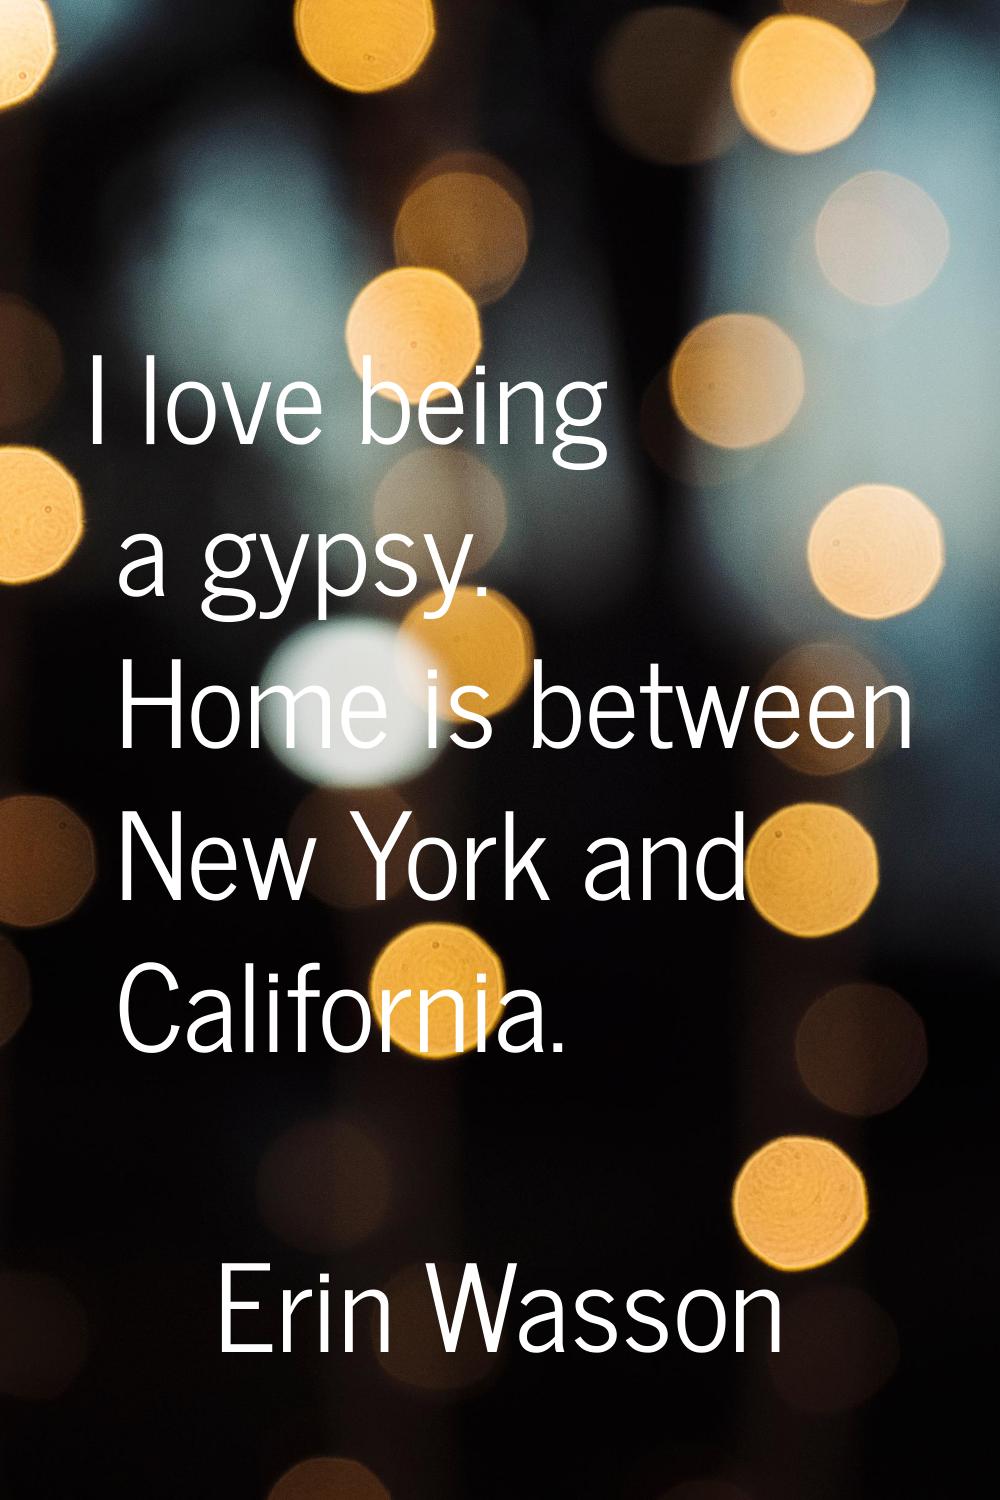 I love being a gypsy. Home is between New York and California.